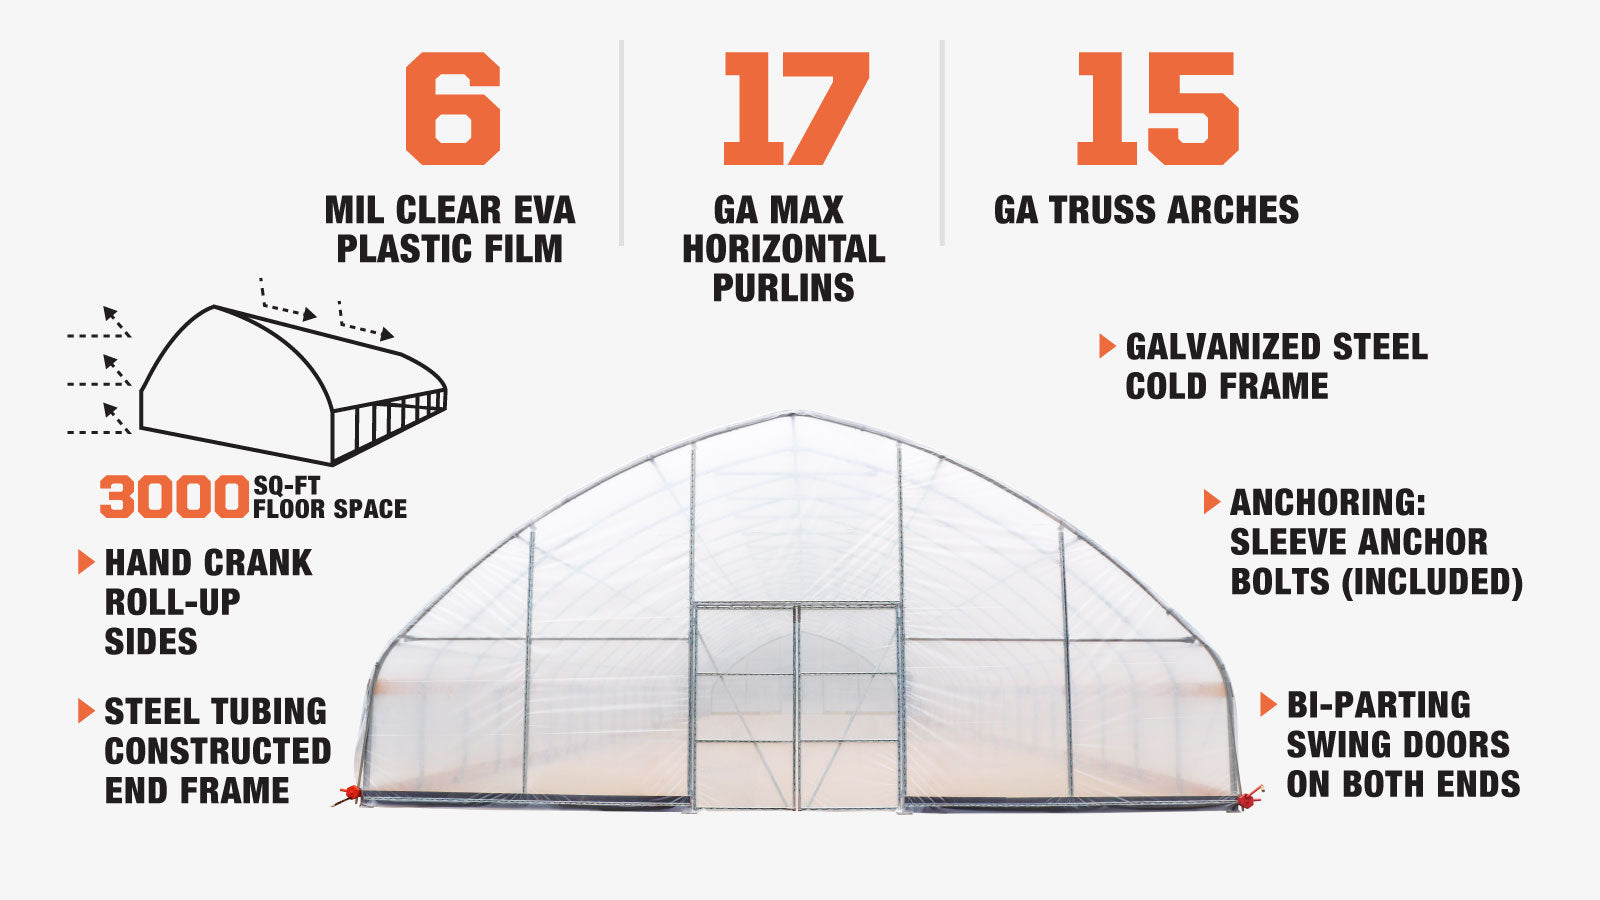 TMG Industrial 30’ x 100’ Tunnel Greenhouse Grow Tent w/6 Mil Clear EVA Plastic Film, Cold Frame, Hand Crank Roll-Up Sides, Peak Ceiling Roof, TMG-GH30100-description-image